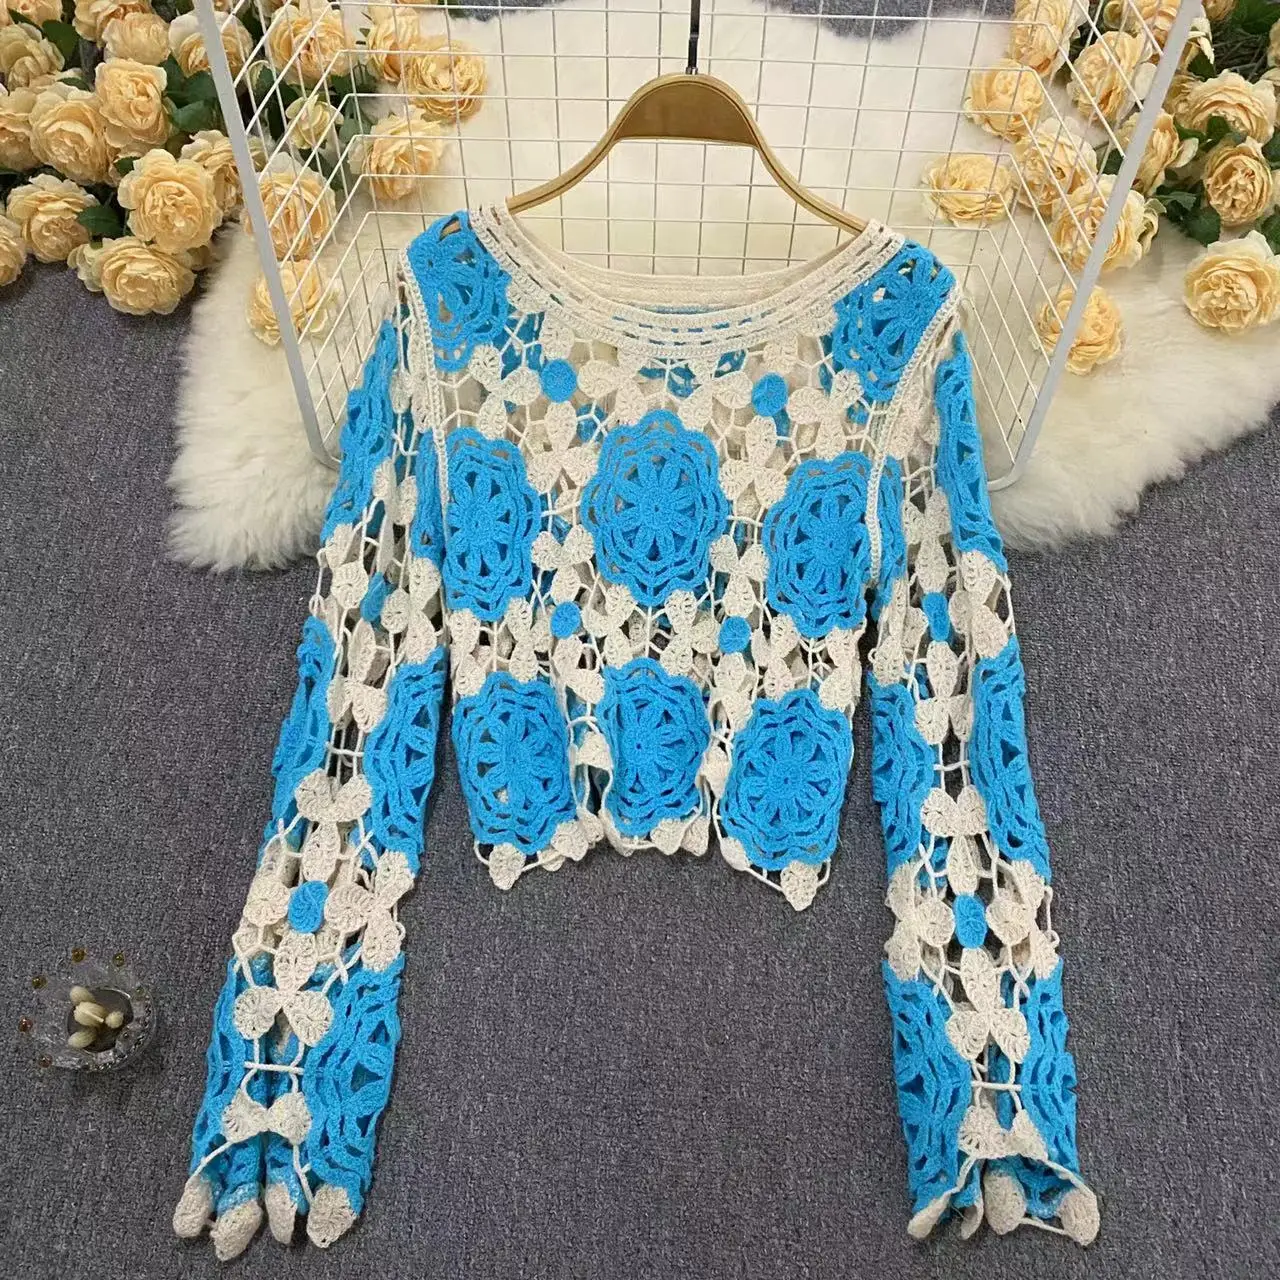 

Women O-Neck Flowers Crocheted Hollow Shirts Long Flare sleeved Floral Sweater Summer Thin Hooked Pullovers T-shirt Jumpers Tops